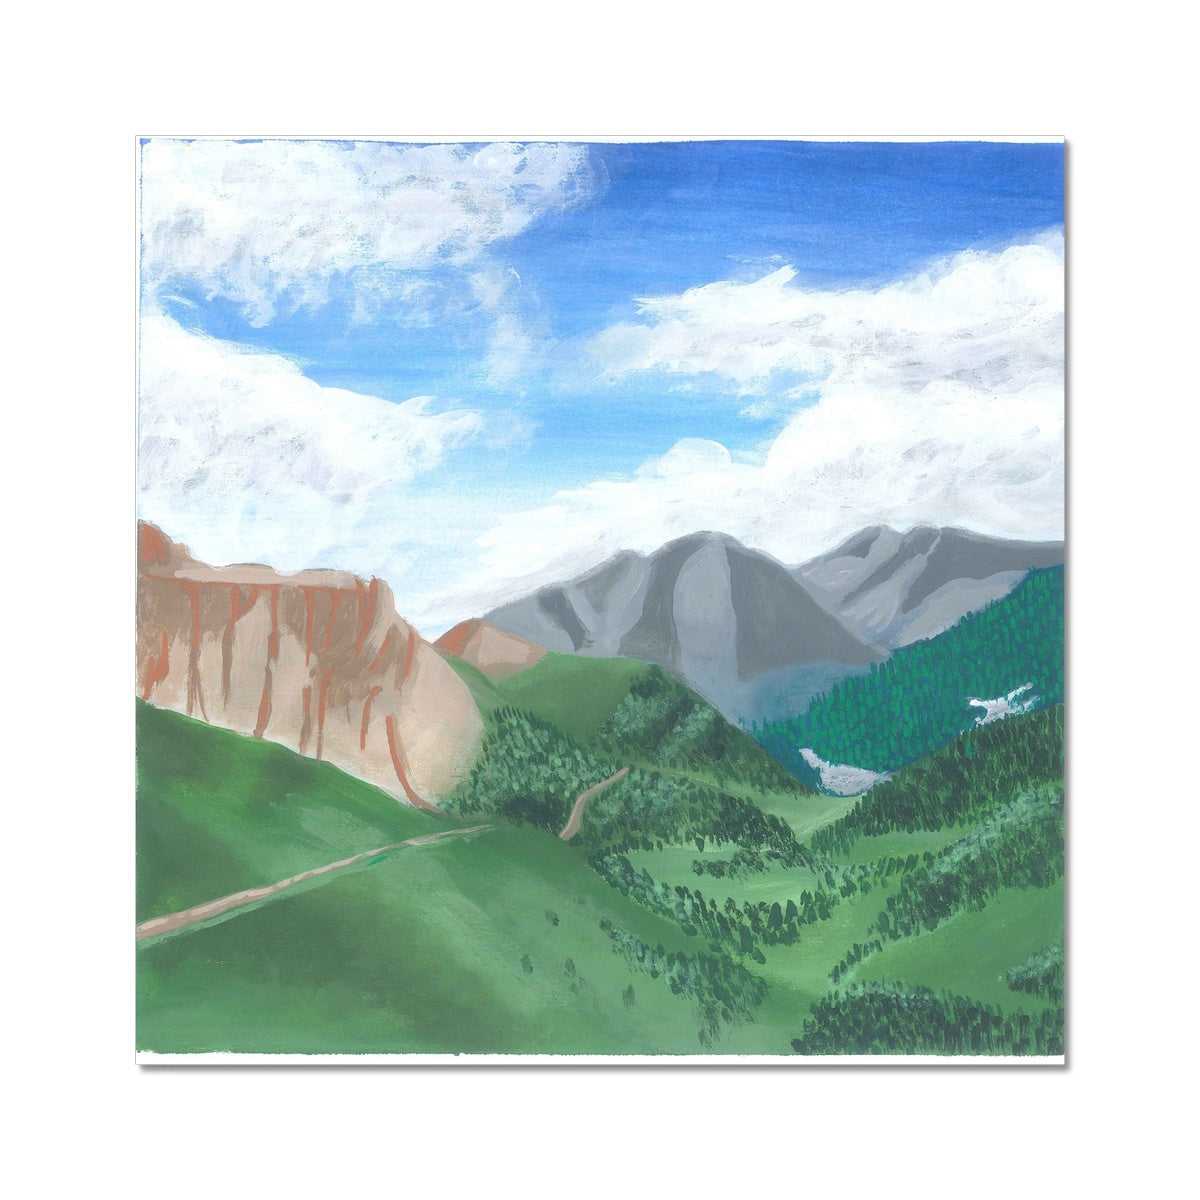 Echoes in the Alps - Bright Day Over Green Valleys and Majestic Mountains Fine Art Print - nature soundscape art - earth.fm